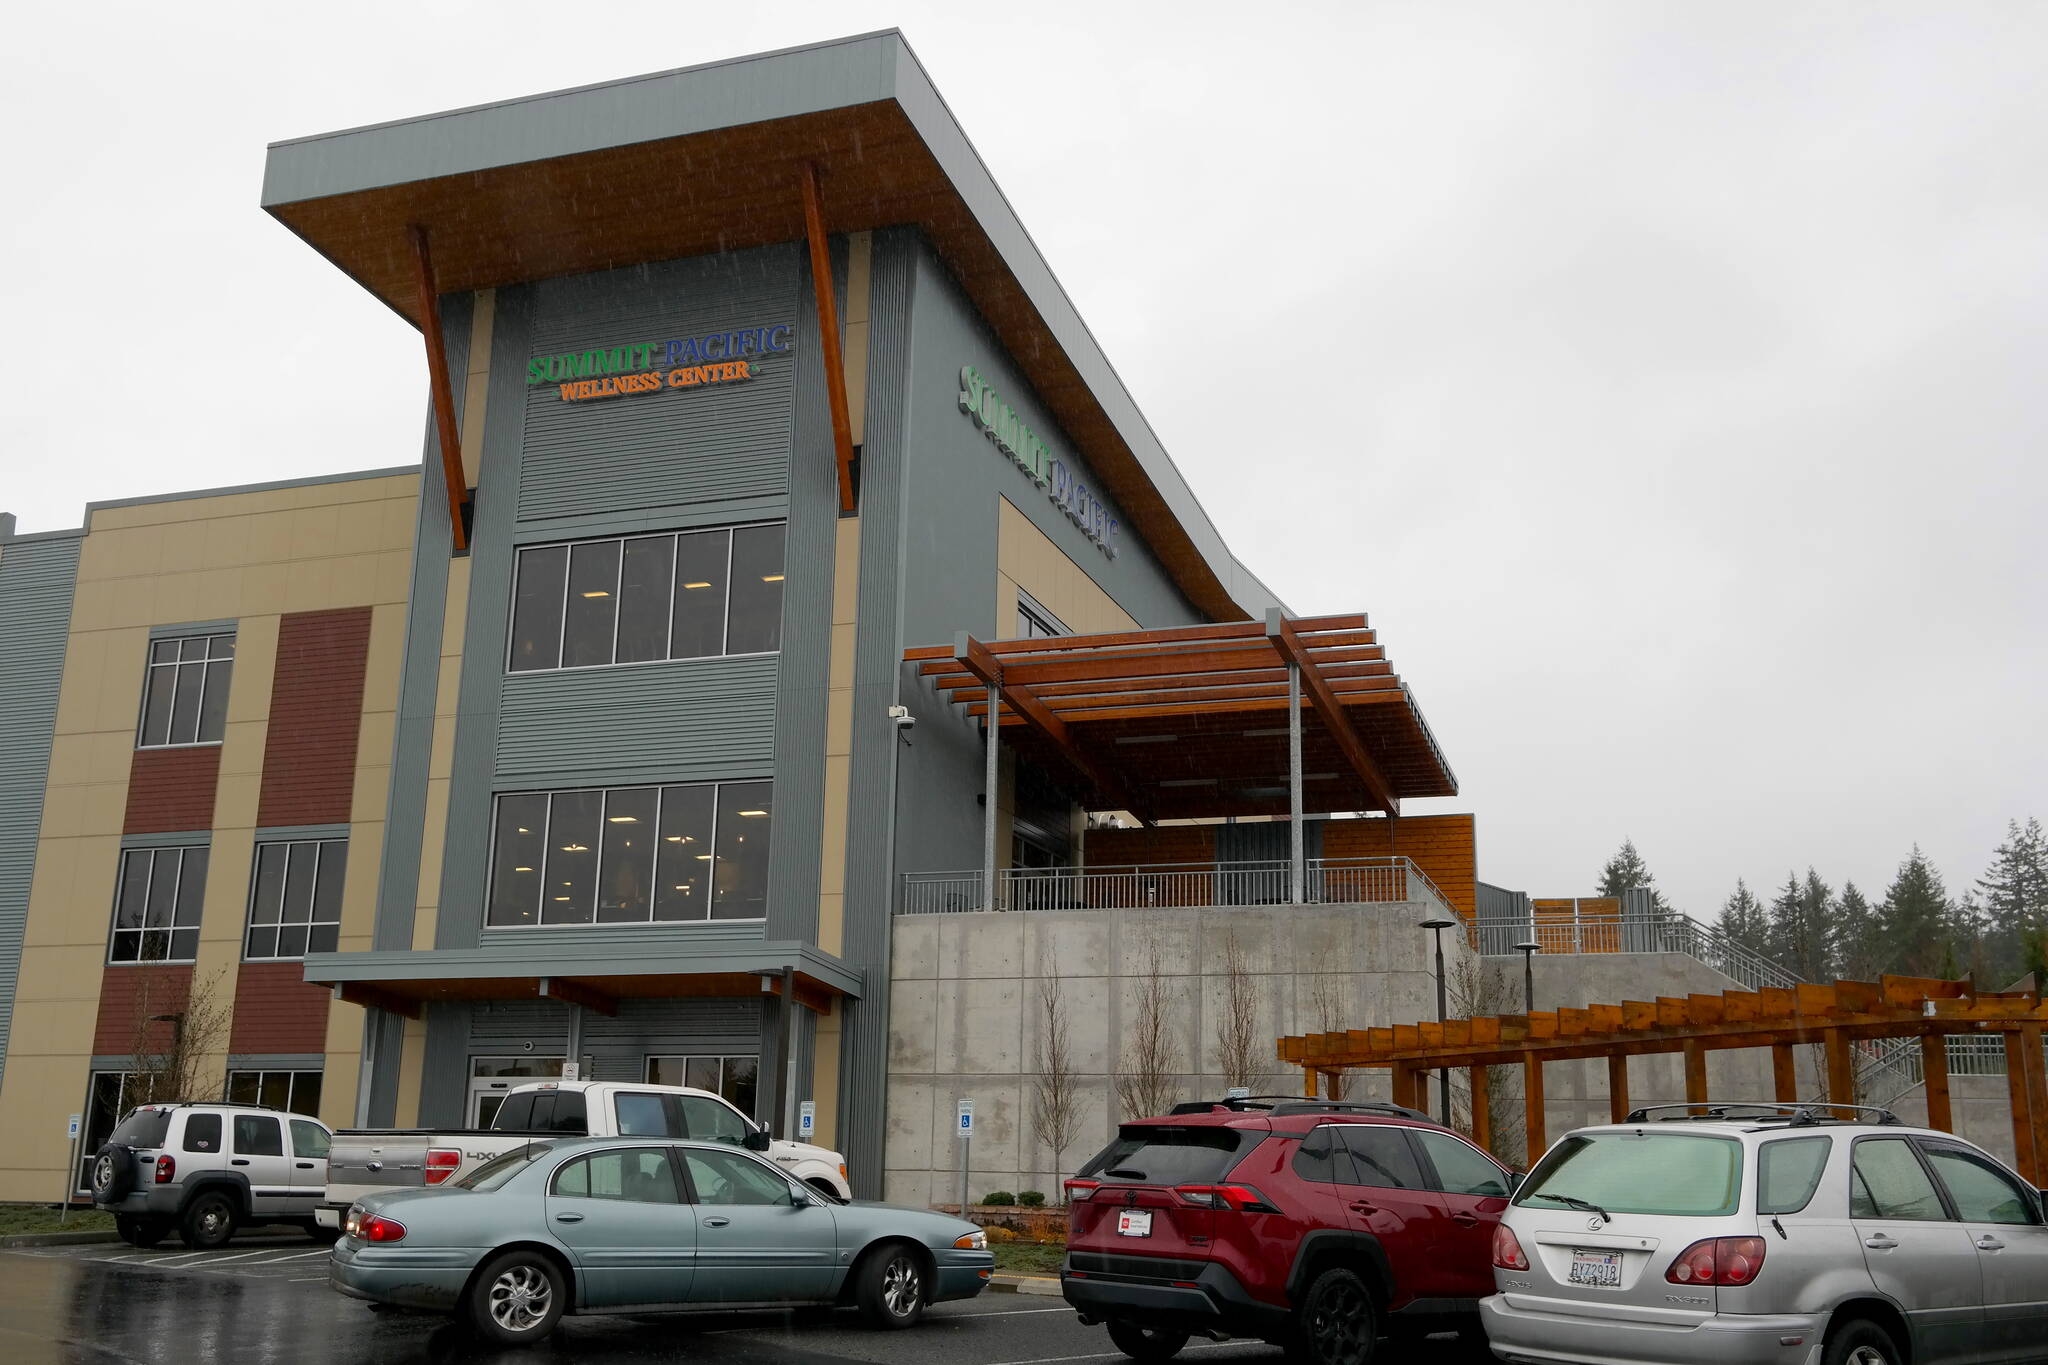 The Summit Pacific Wellness Center opened Jan. 25, 2019 and added up 80 new jobs to the community. Summit Pacific invested $31 million into the three-story, 60,000-square foot facility.
Erika Gebhardt I The Daily World